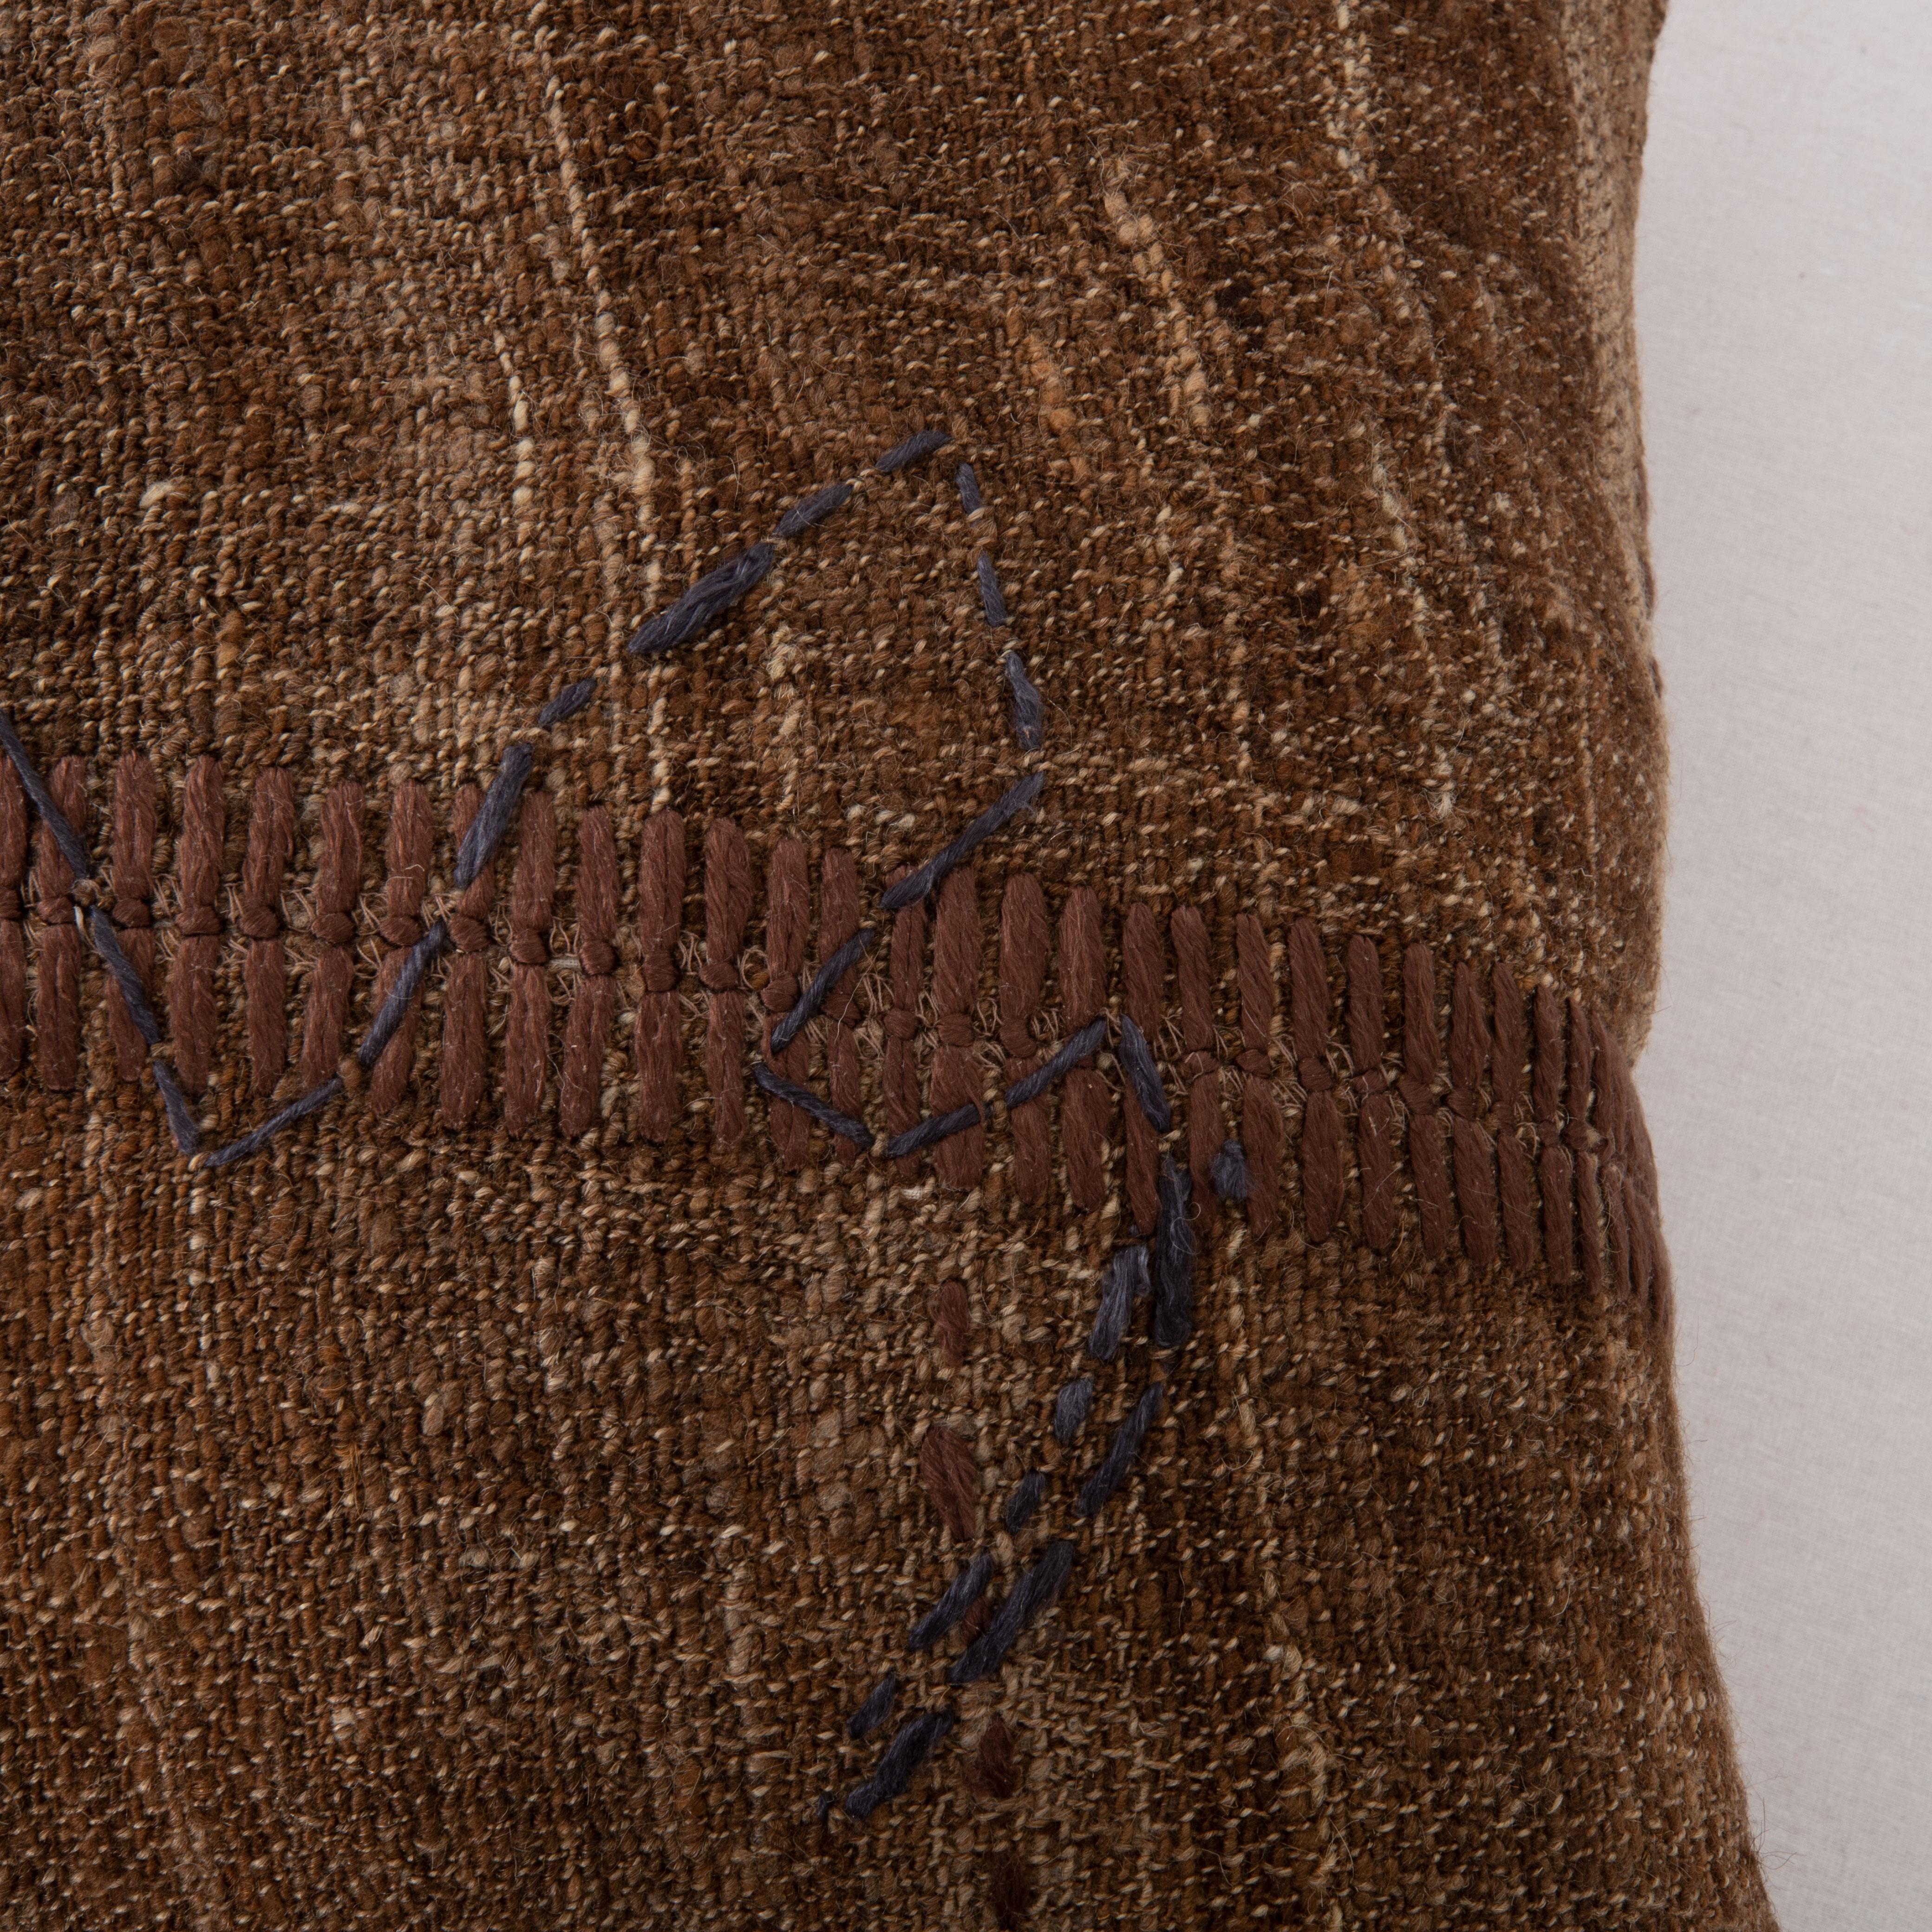 Kilim Rustic Pillow Case Made from a Vintage Un-Dyed Wool Coverlet, Mid 20th C For Sale